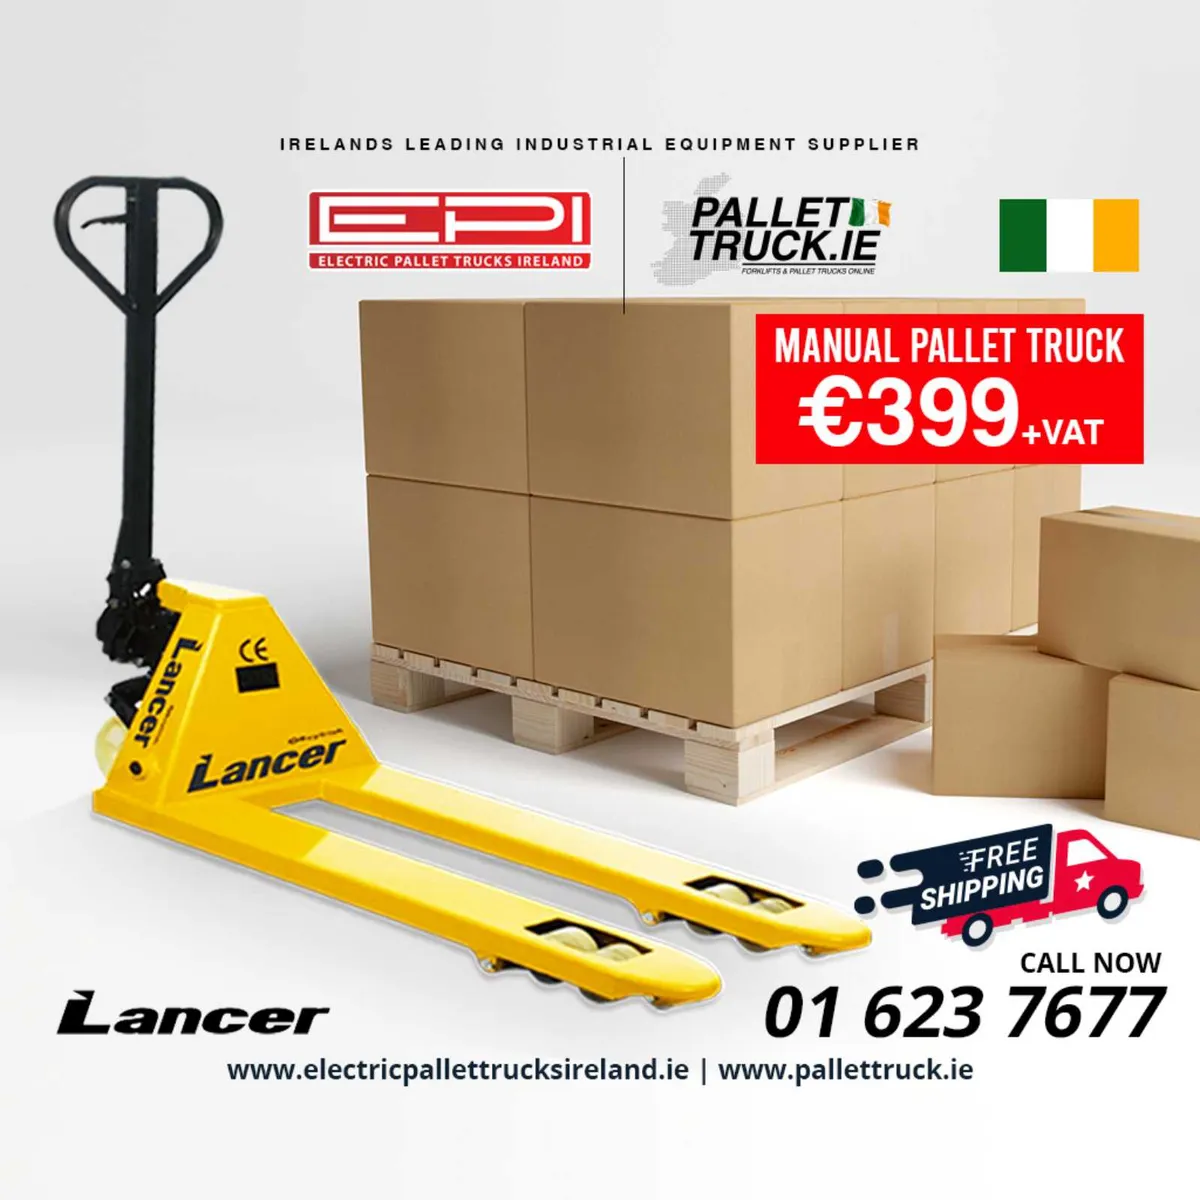 Pallet Truck Supplier Free Delivery🇮🇪☘️